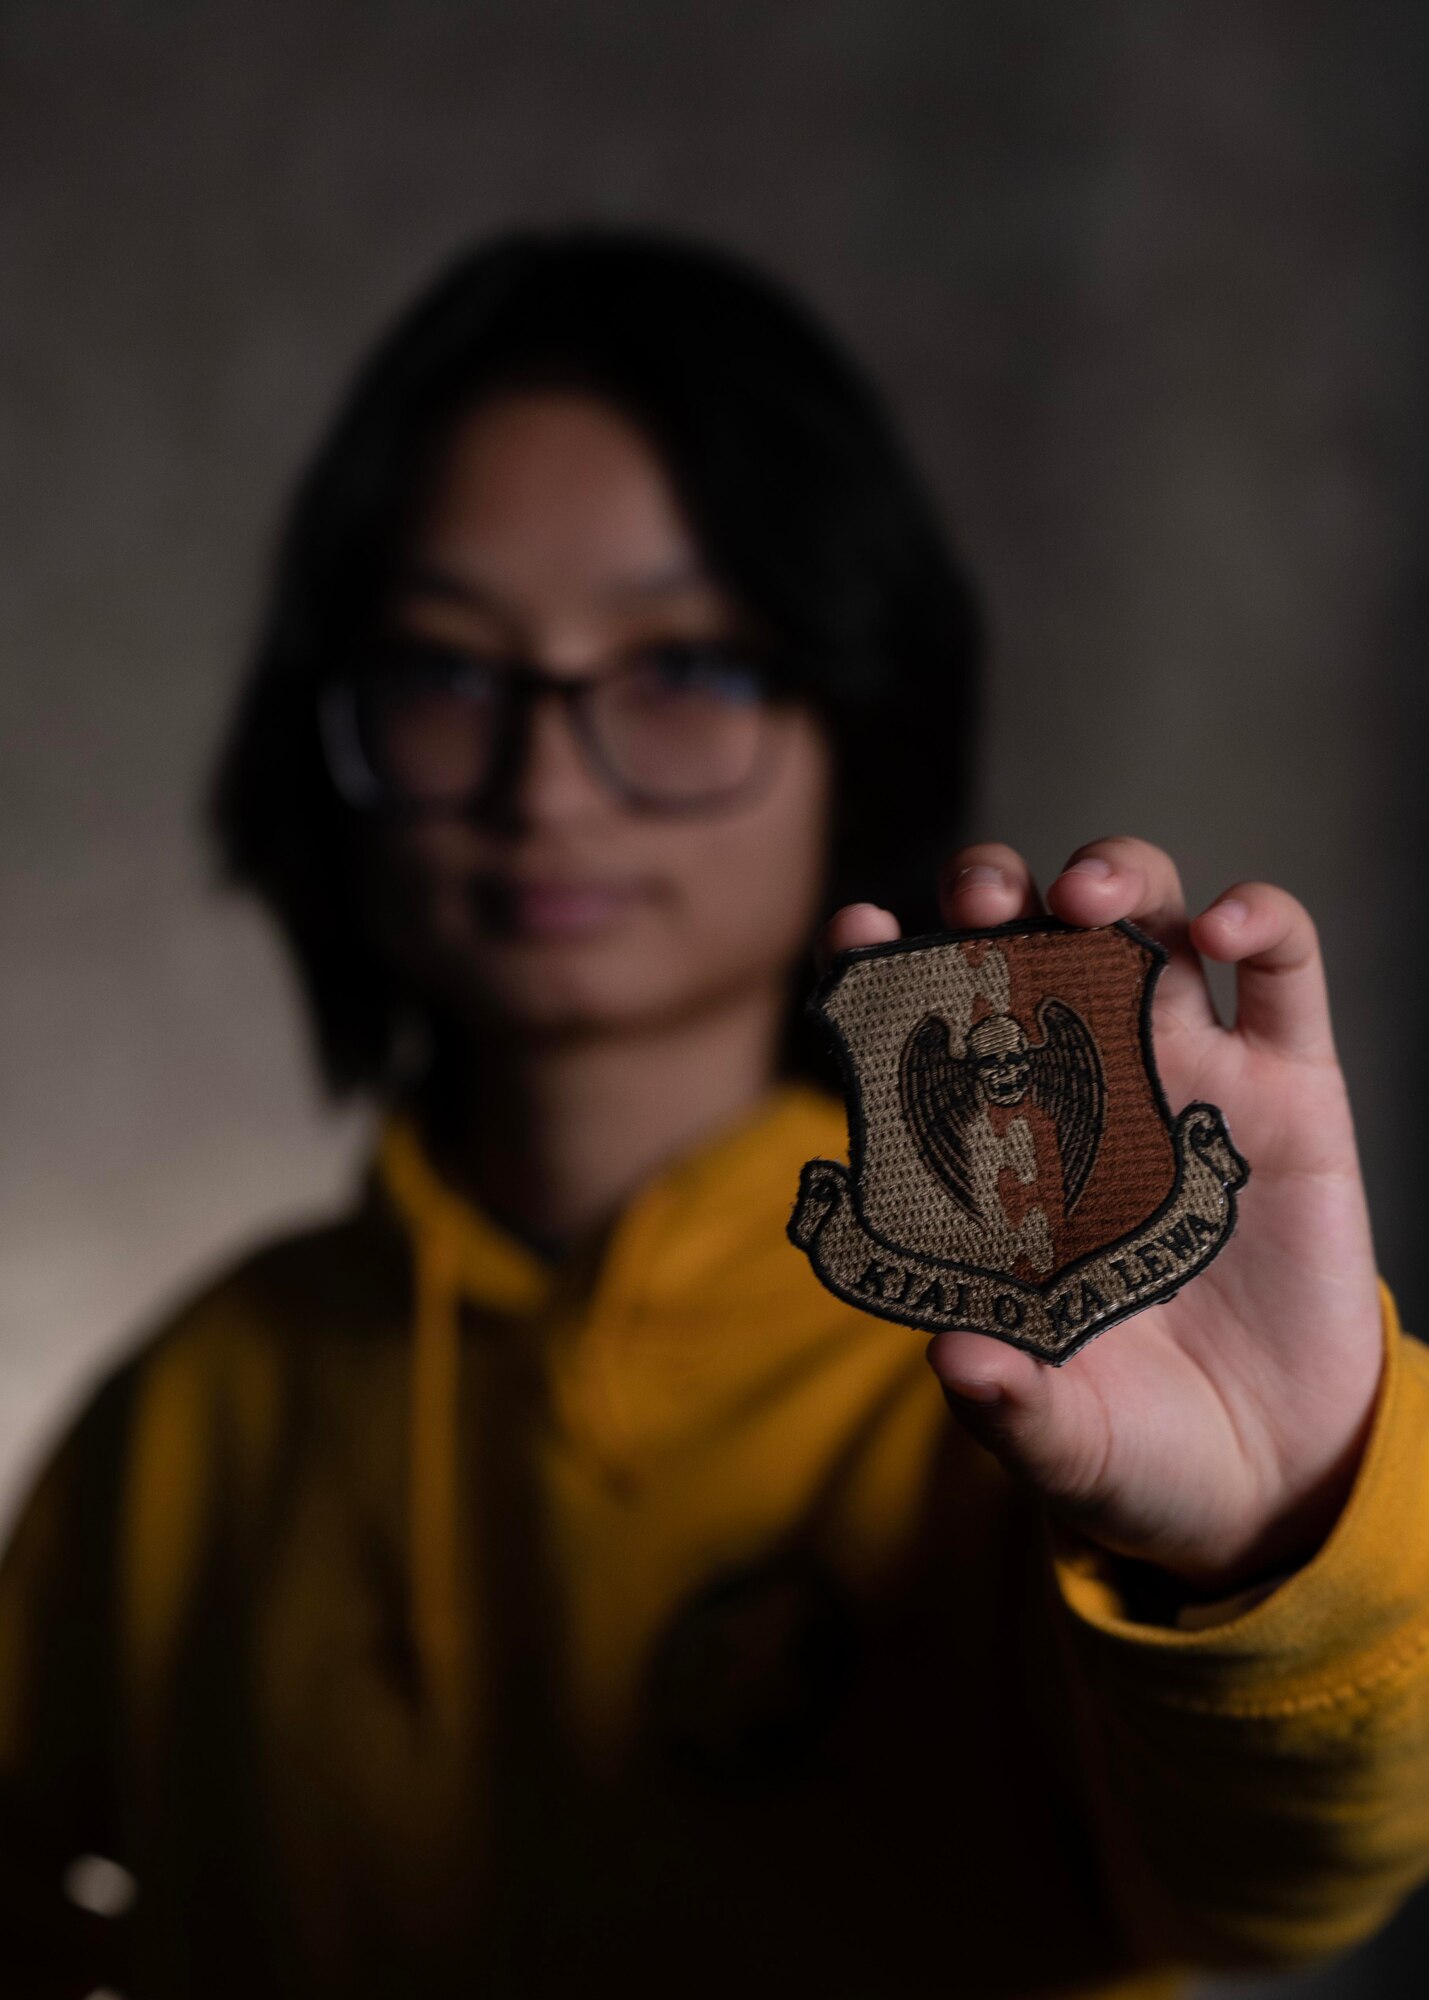 U.S. Air Force Airman 1st Class Lammy Vong, 5th Comptroller Squadron financial operations technician, poses for a photo at Minot Air Force Base, North Dakota, May 25, 2023. Vong was born and raised in Vietnam, and moved to the United States when she was just ten years old. (U.S. Air Force photo by Airman 1st Class Alexander Nottingham)